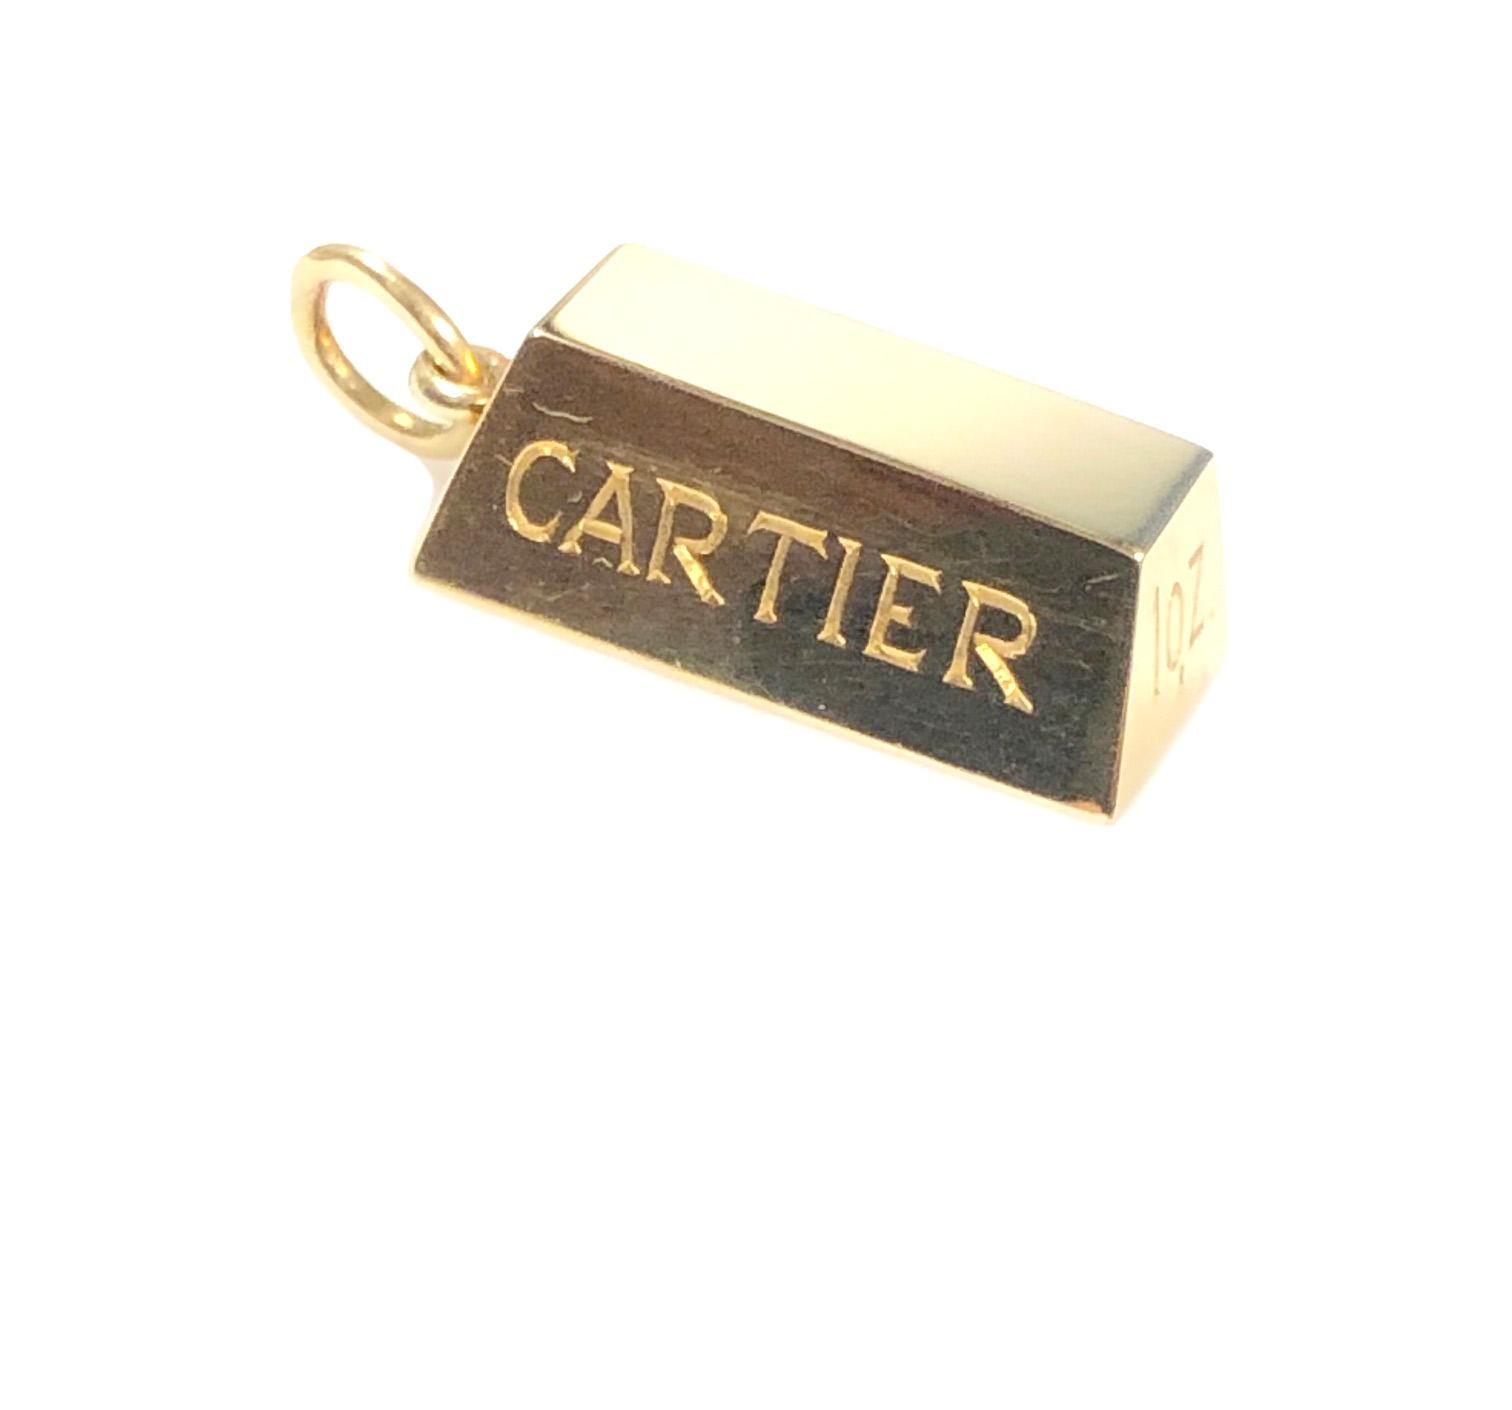 Circa 1970s Cartier 18k Yellow Gold 1 ounce Ingot Pendant. Measuring 1 inch in length,   and comes in the original Cartier Suede Pouch  